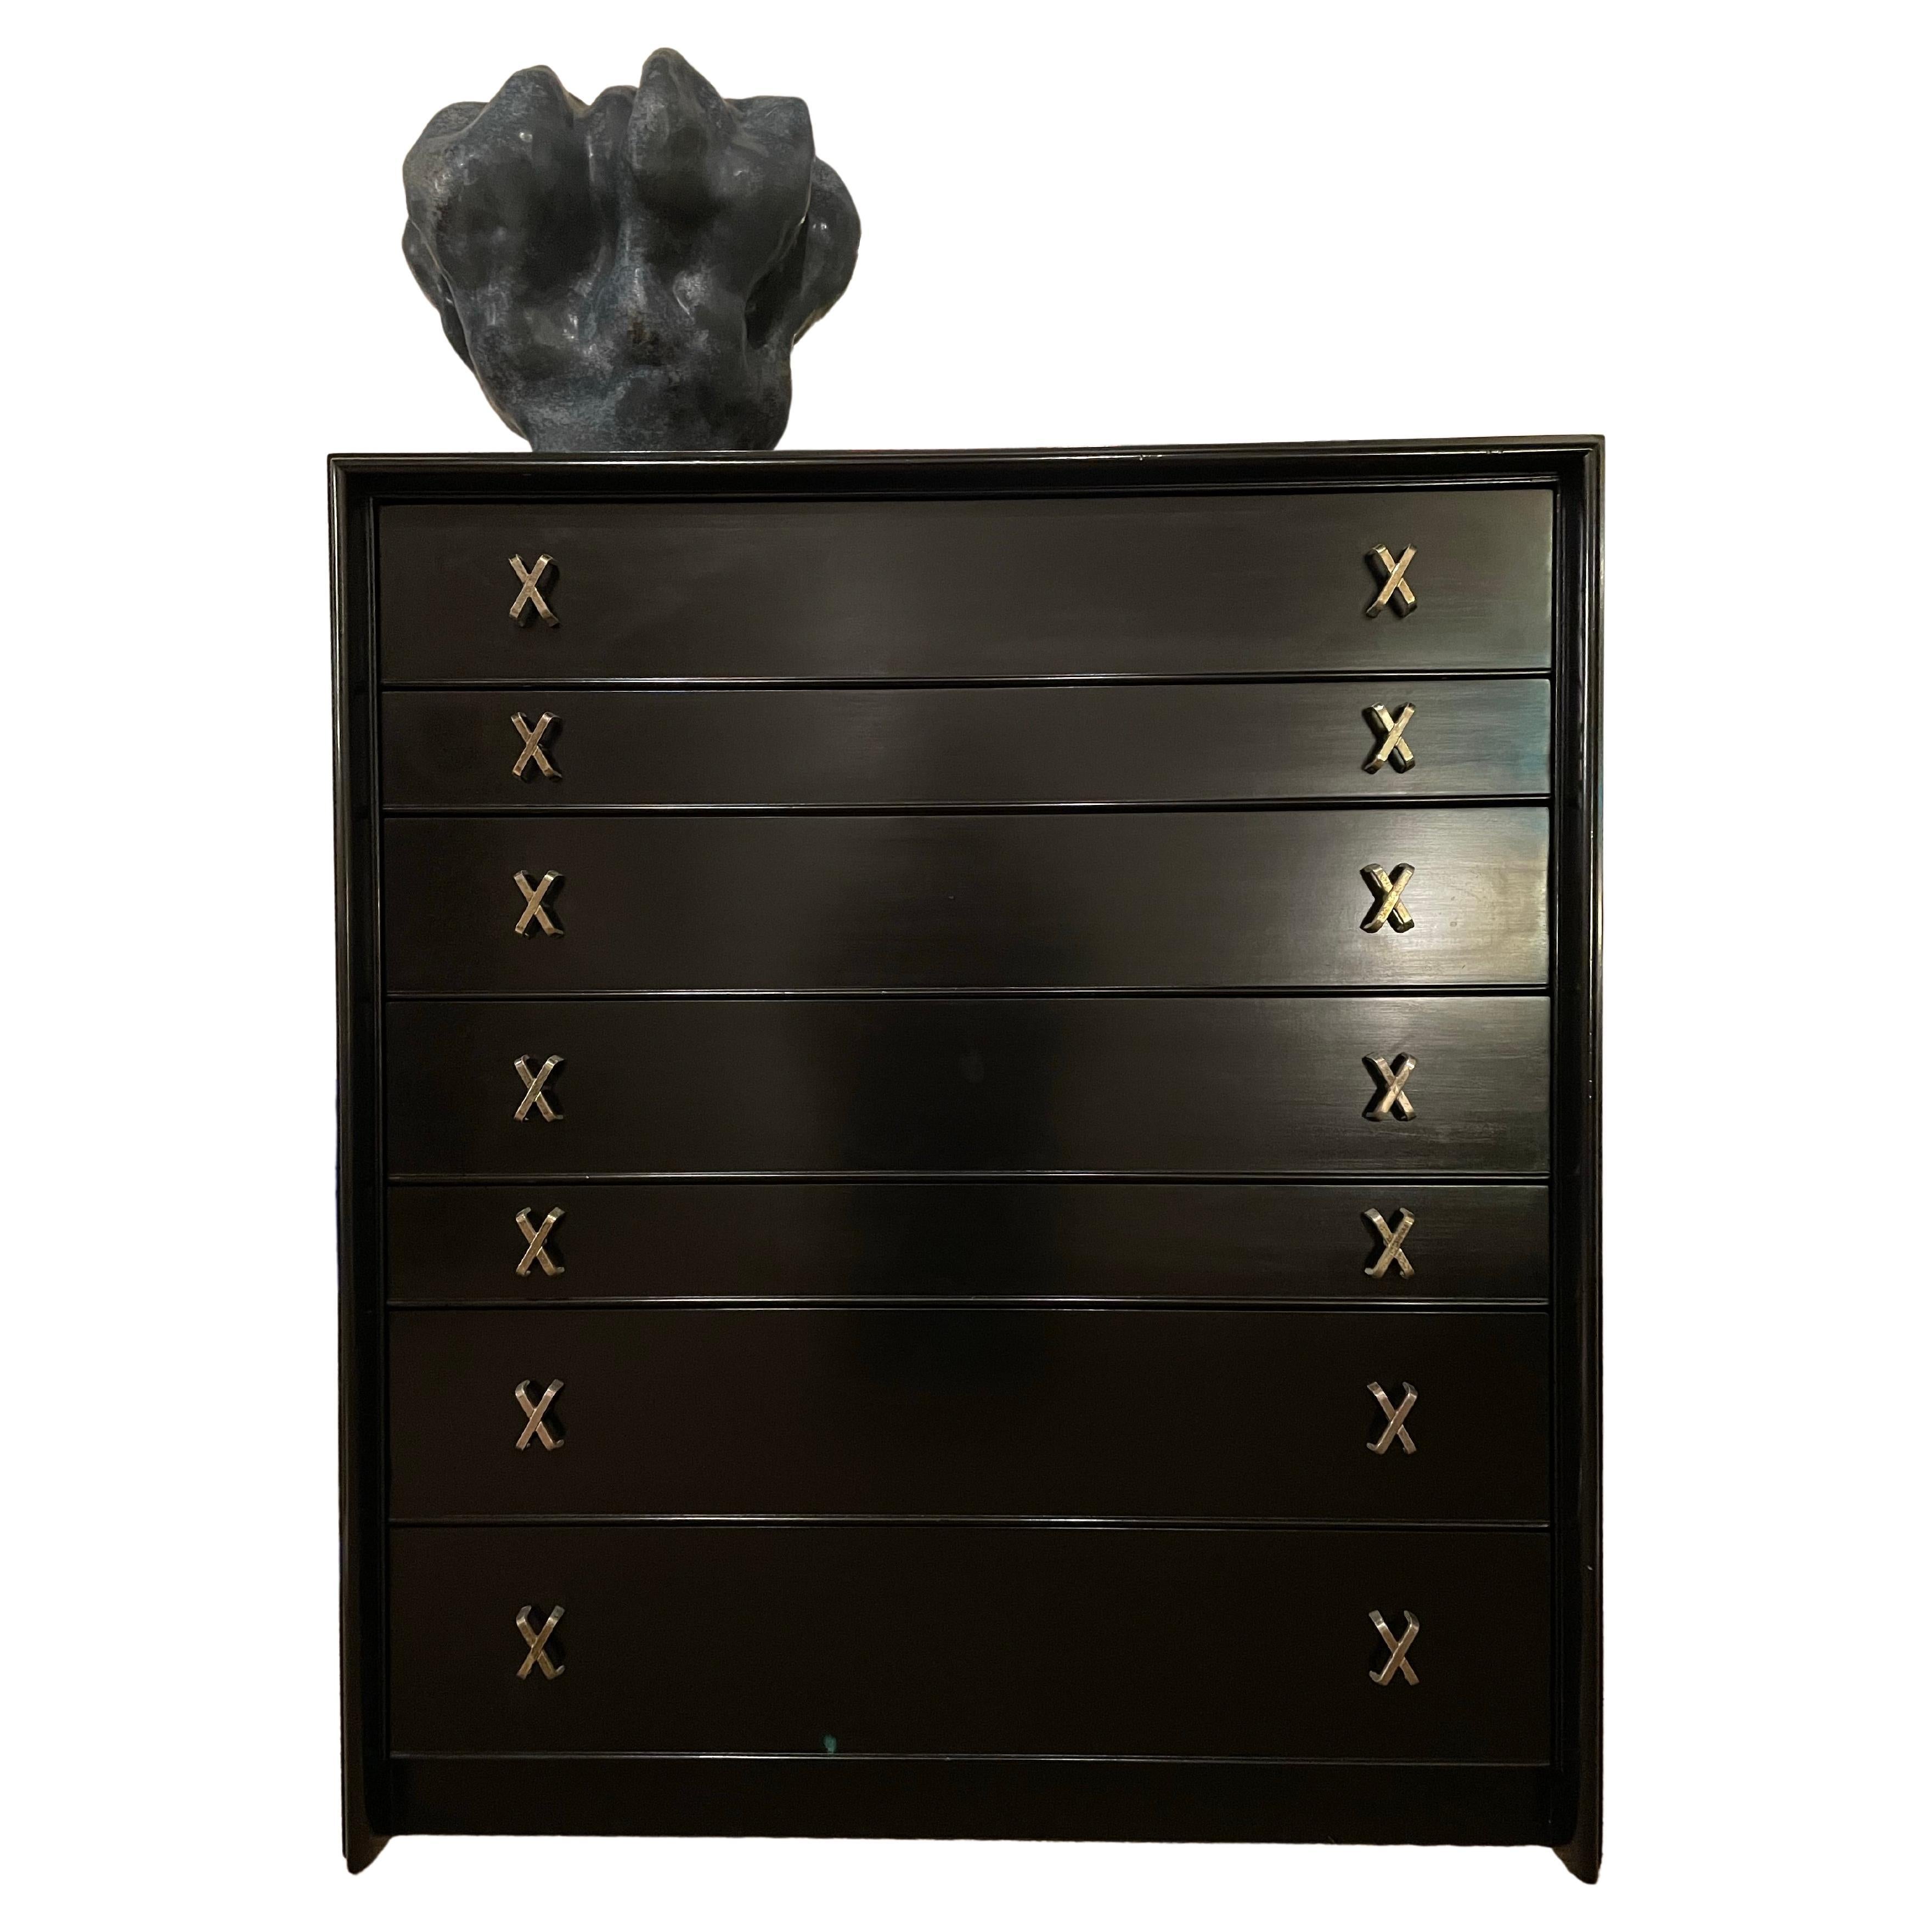 Paul Frankl Gentleman's Chest of Drawers